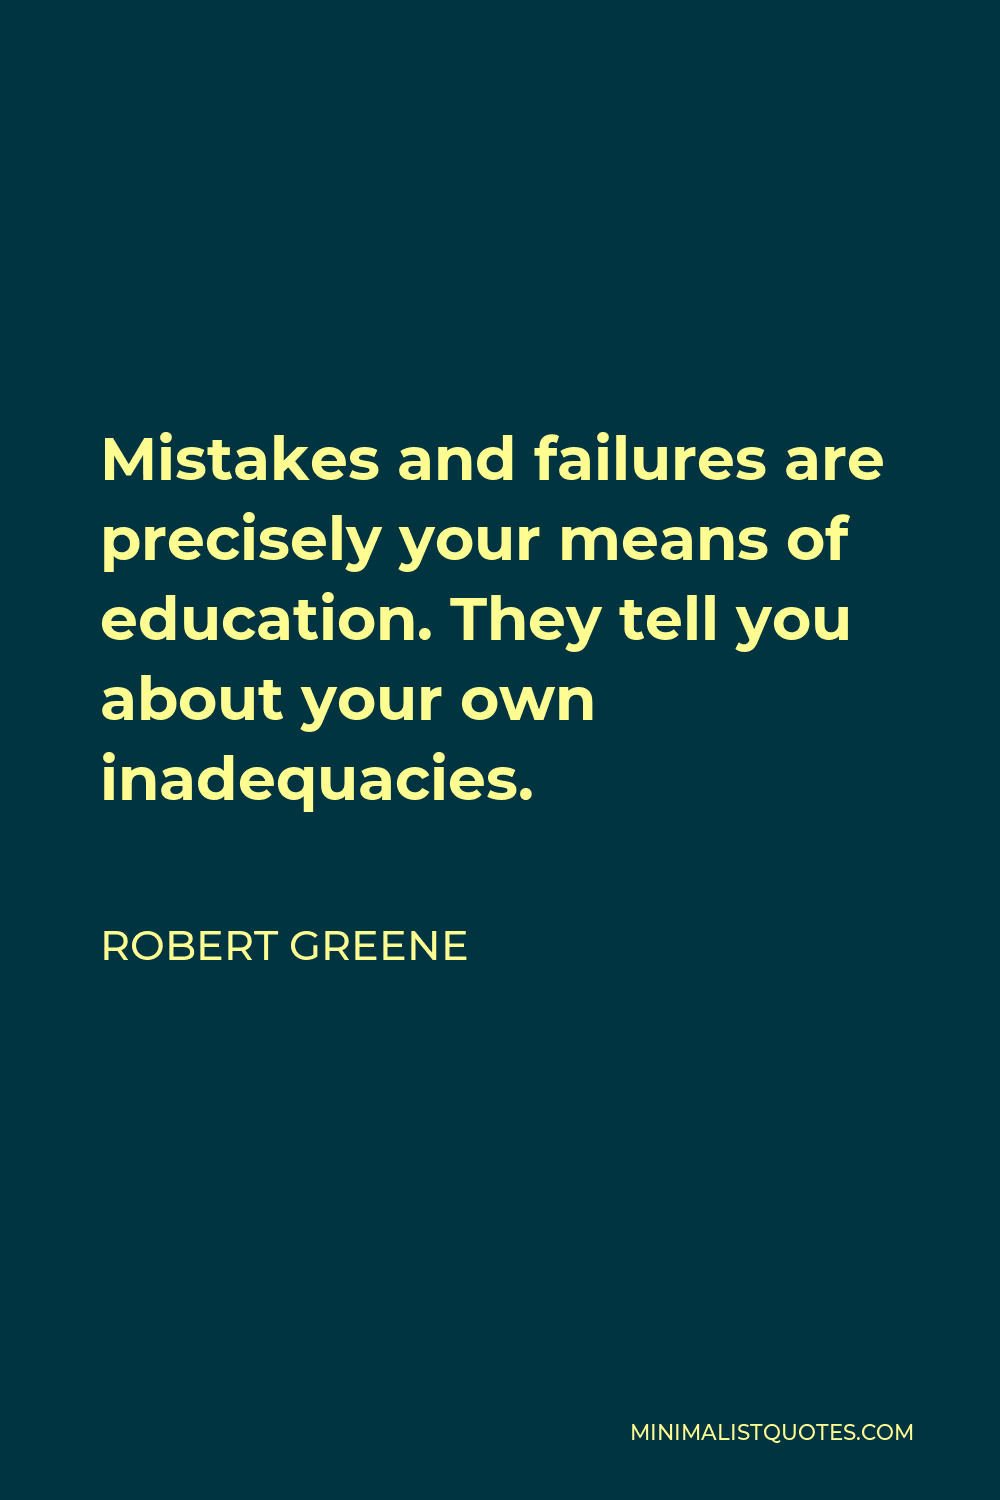 Robert Greene Quote - Mistakes and failures are precisely your means of education. They tell you about your own inadequacies.